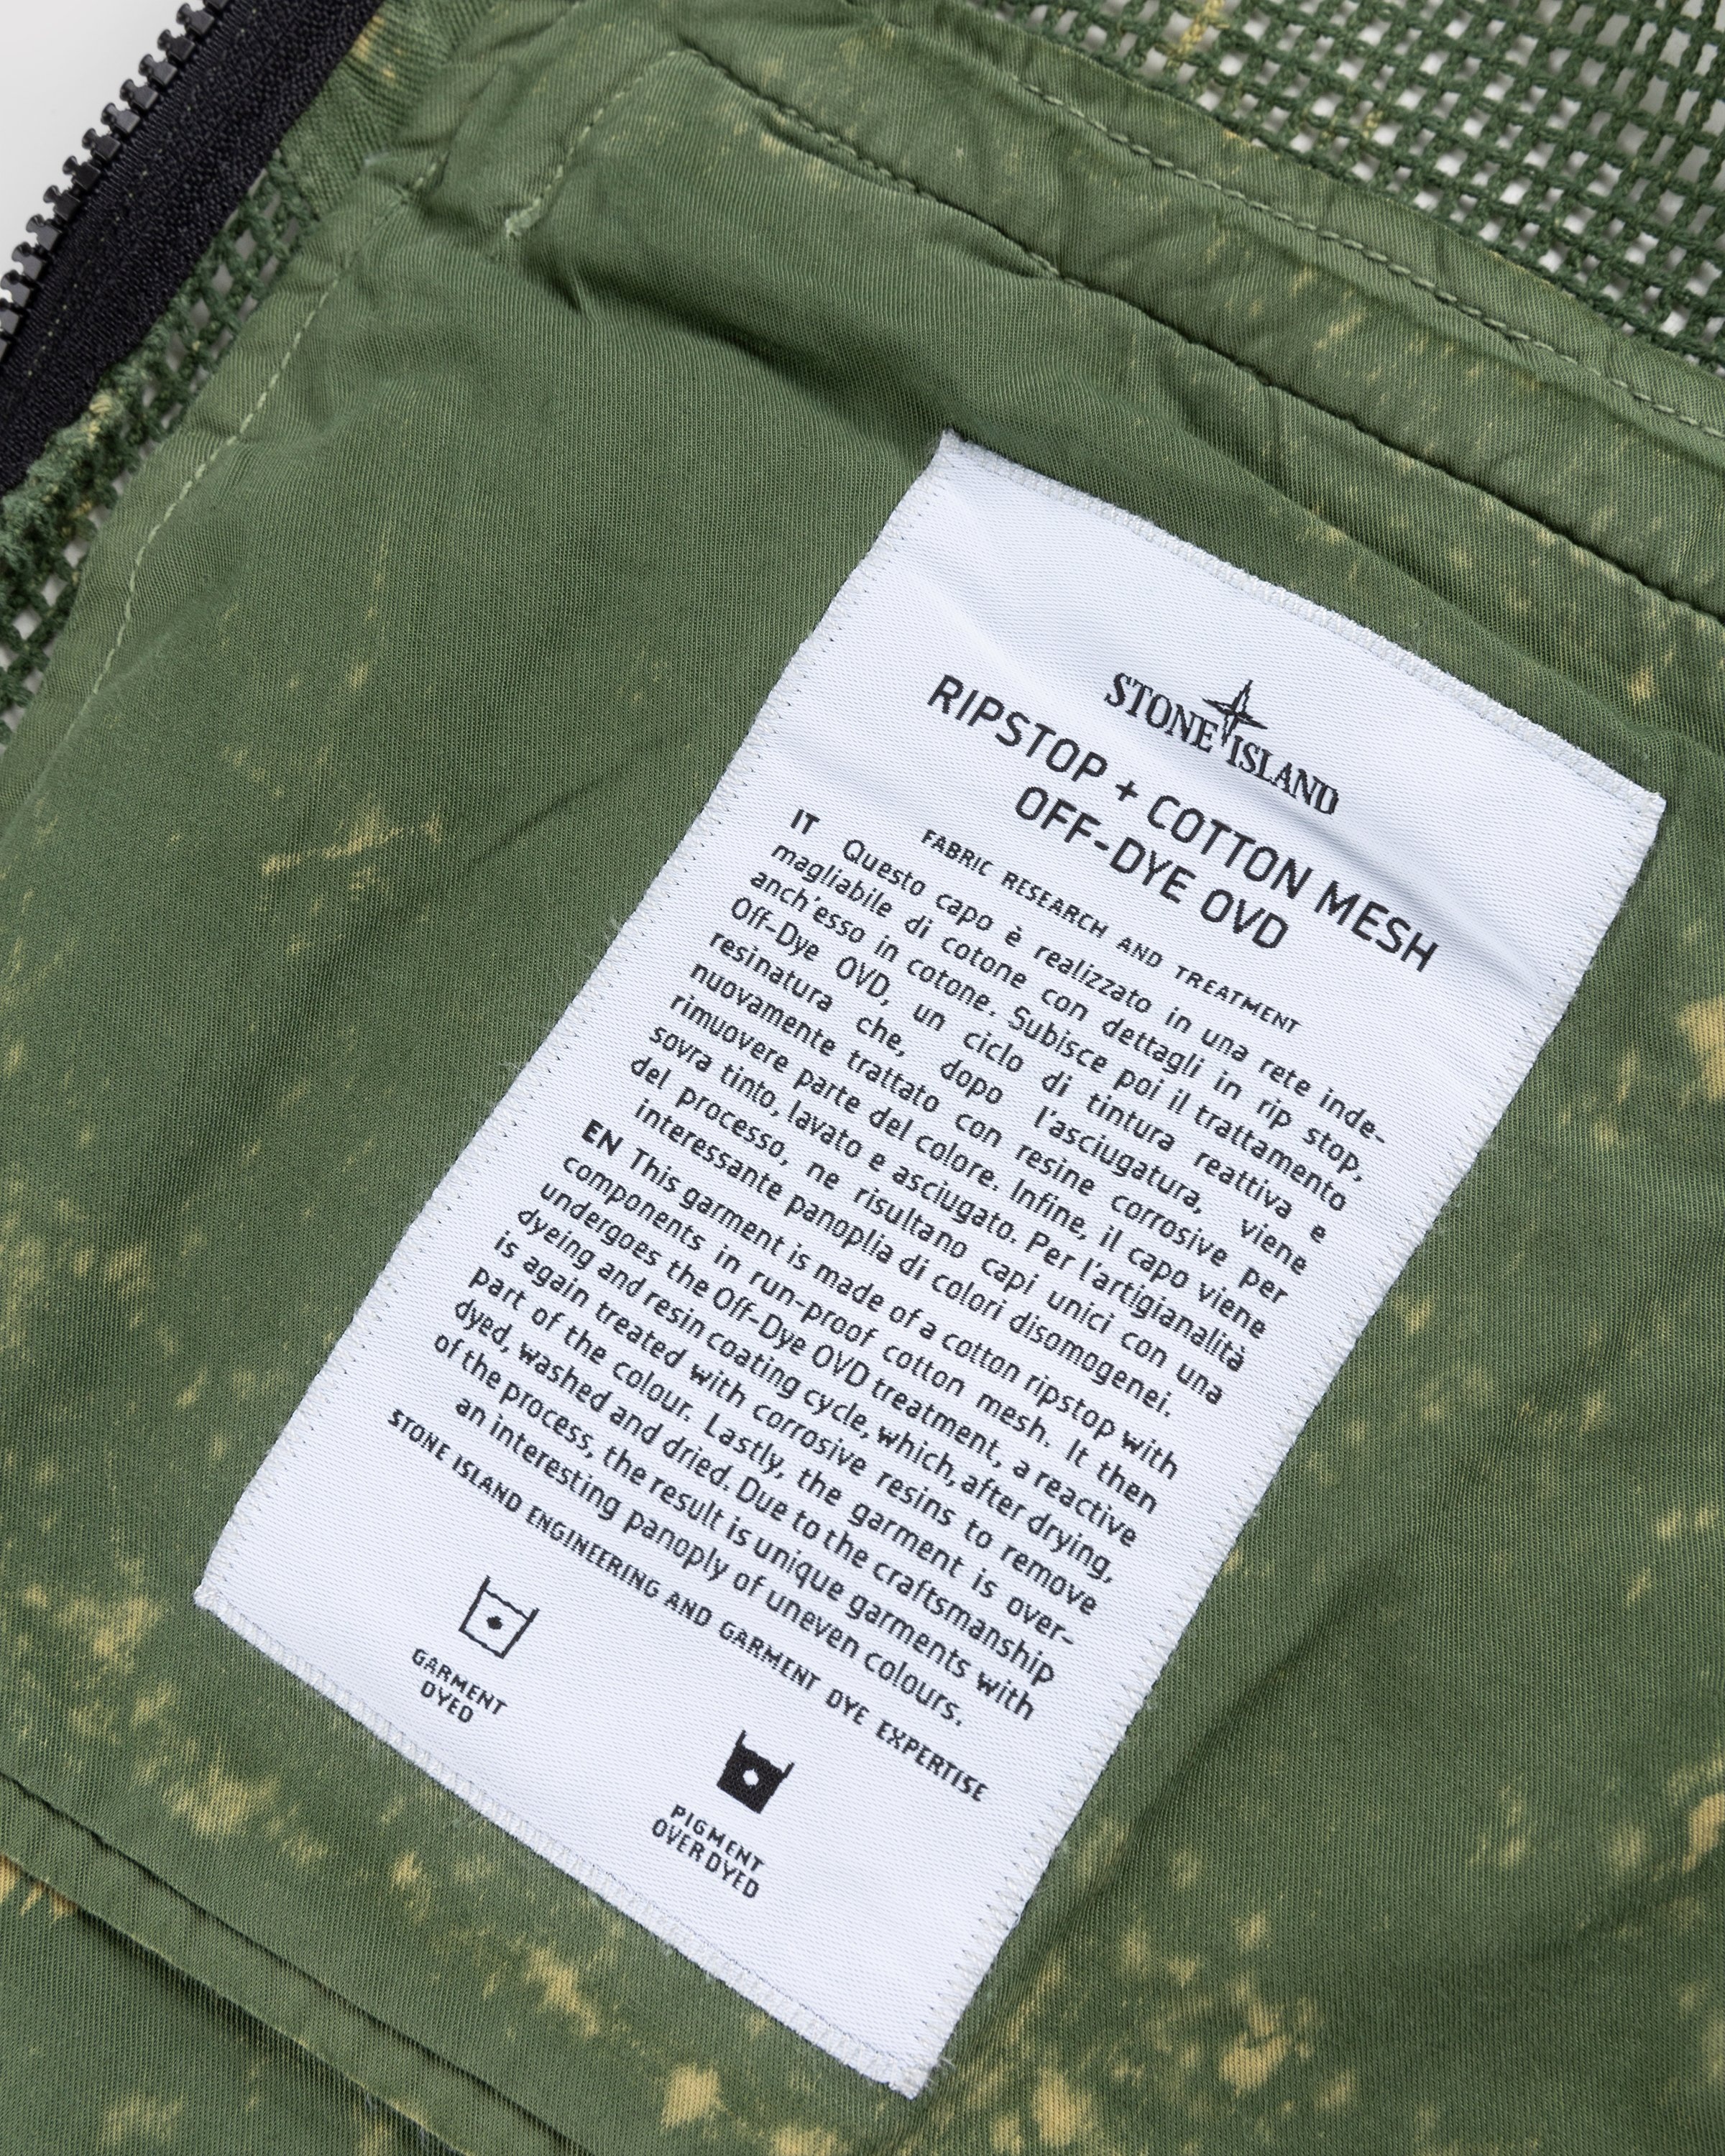 Stone Island – G0622 Garment-Dyed Cotton Mesh Vest Olive - Outerwear - Green - Image 7